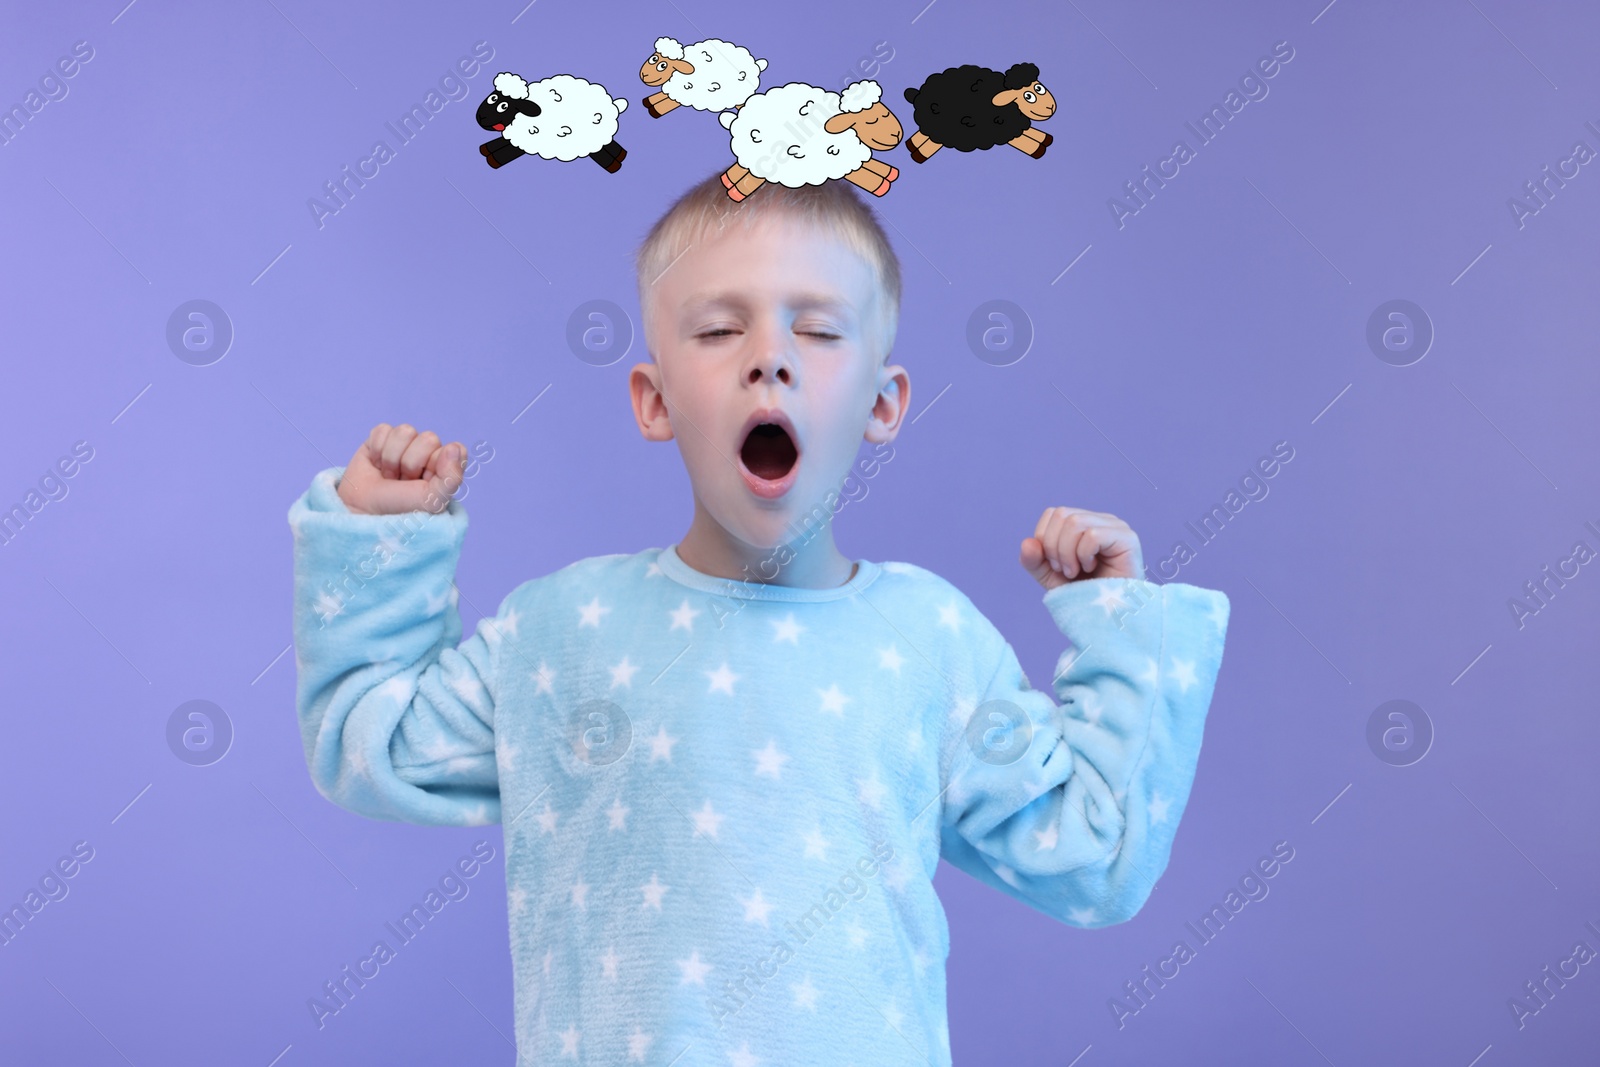 Image of Insomnia problem. Tired boy yawning on purple background. Illustrations of sheep running above his head